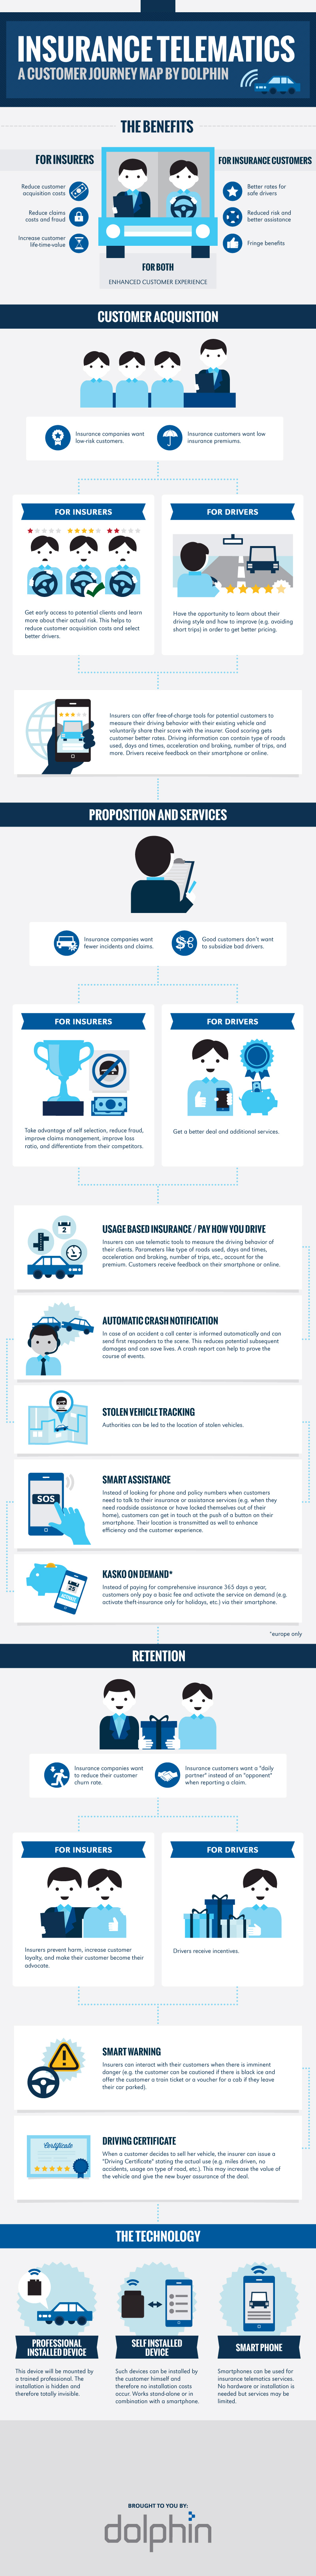 Thumbnail for Insurance Telematics Infographic